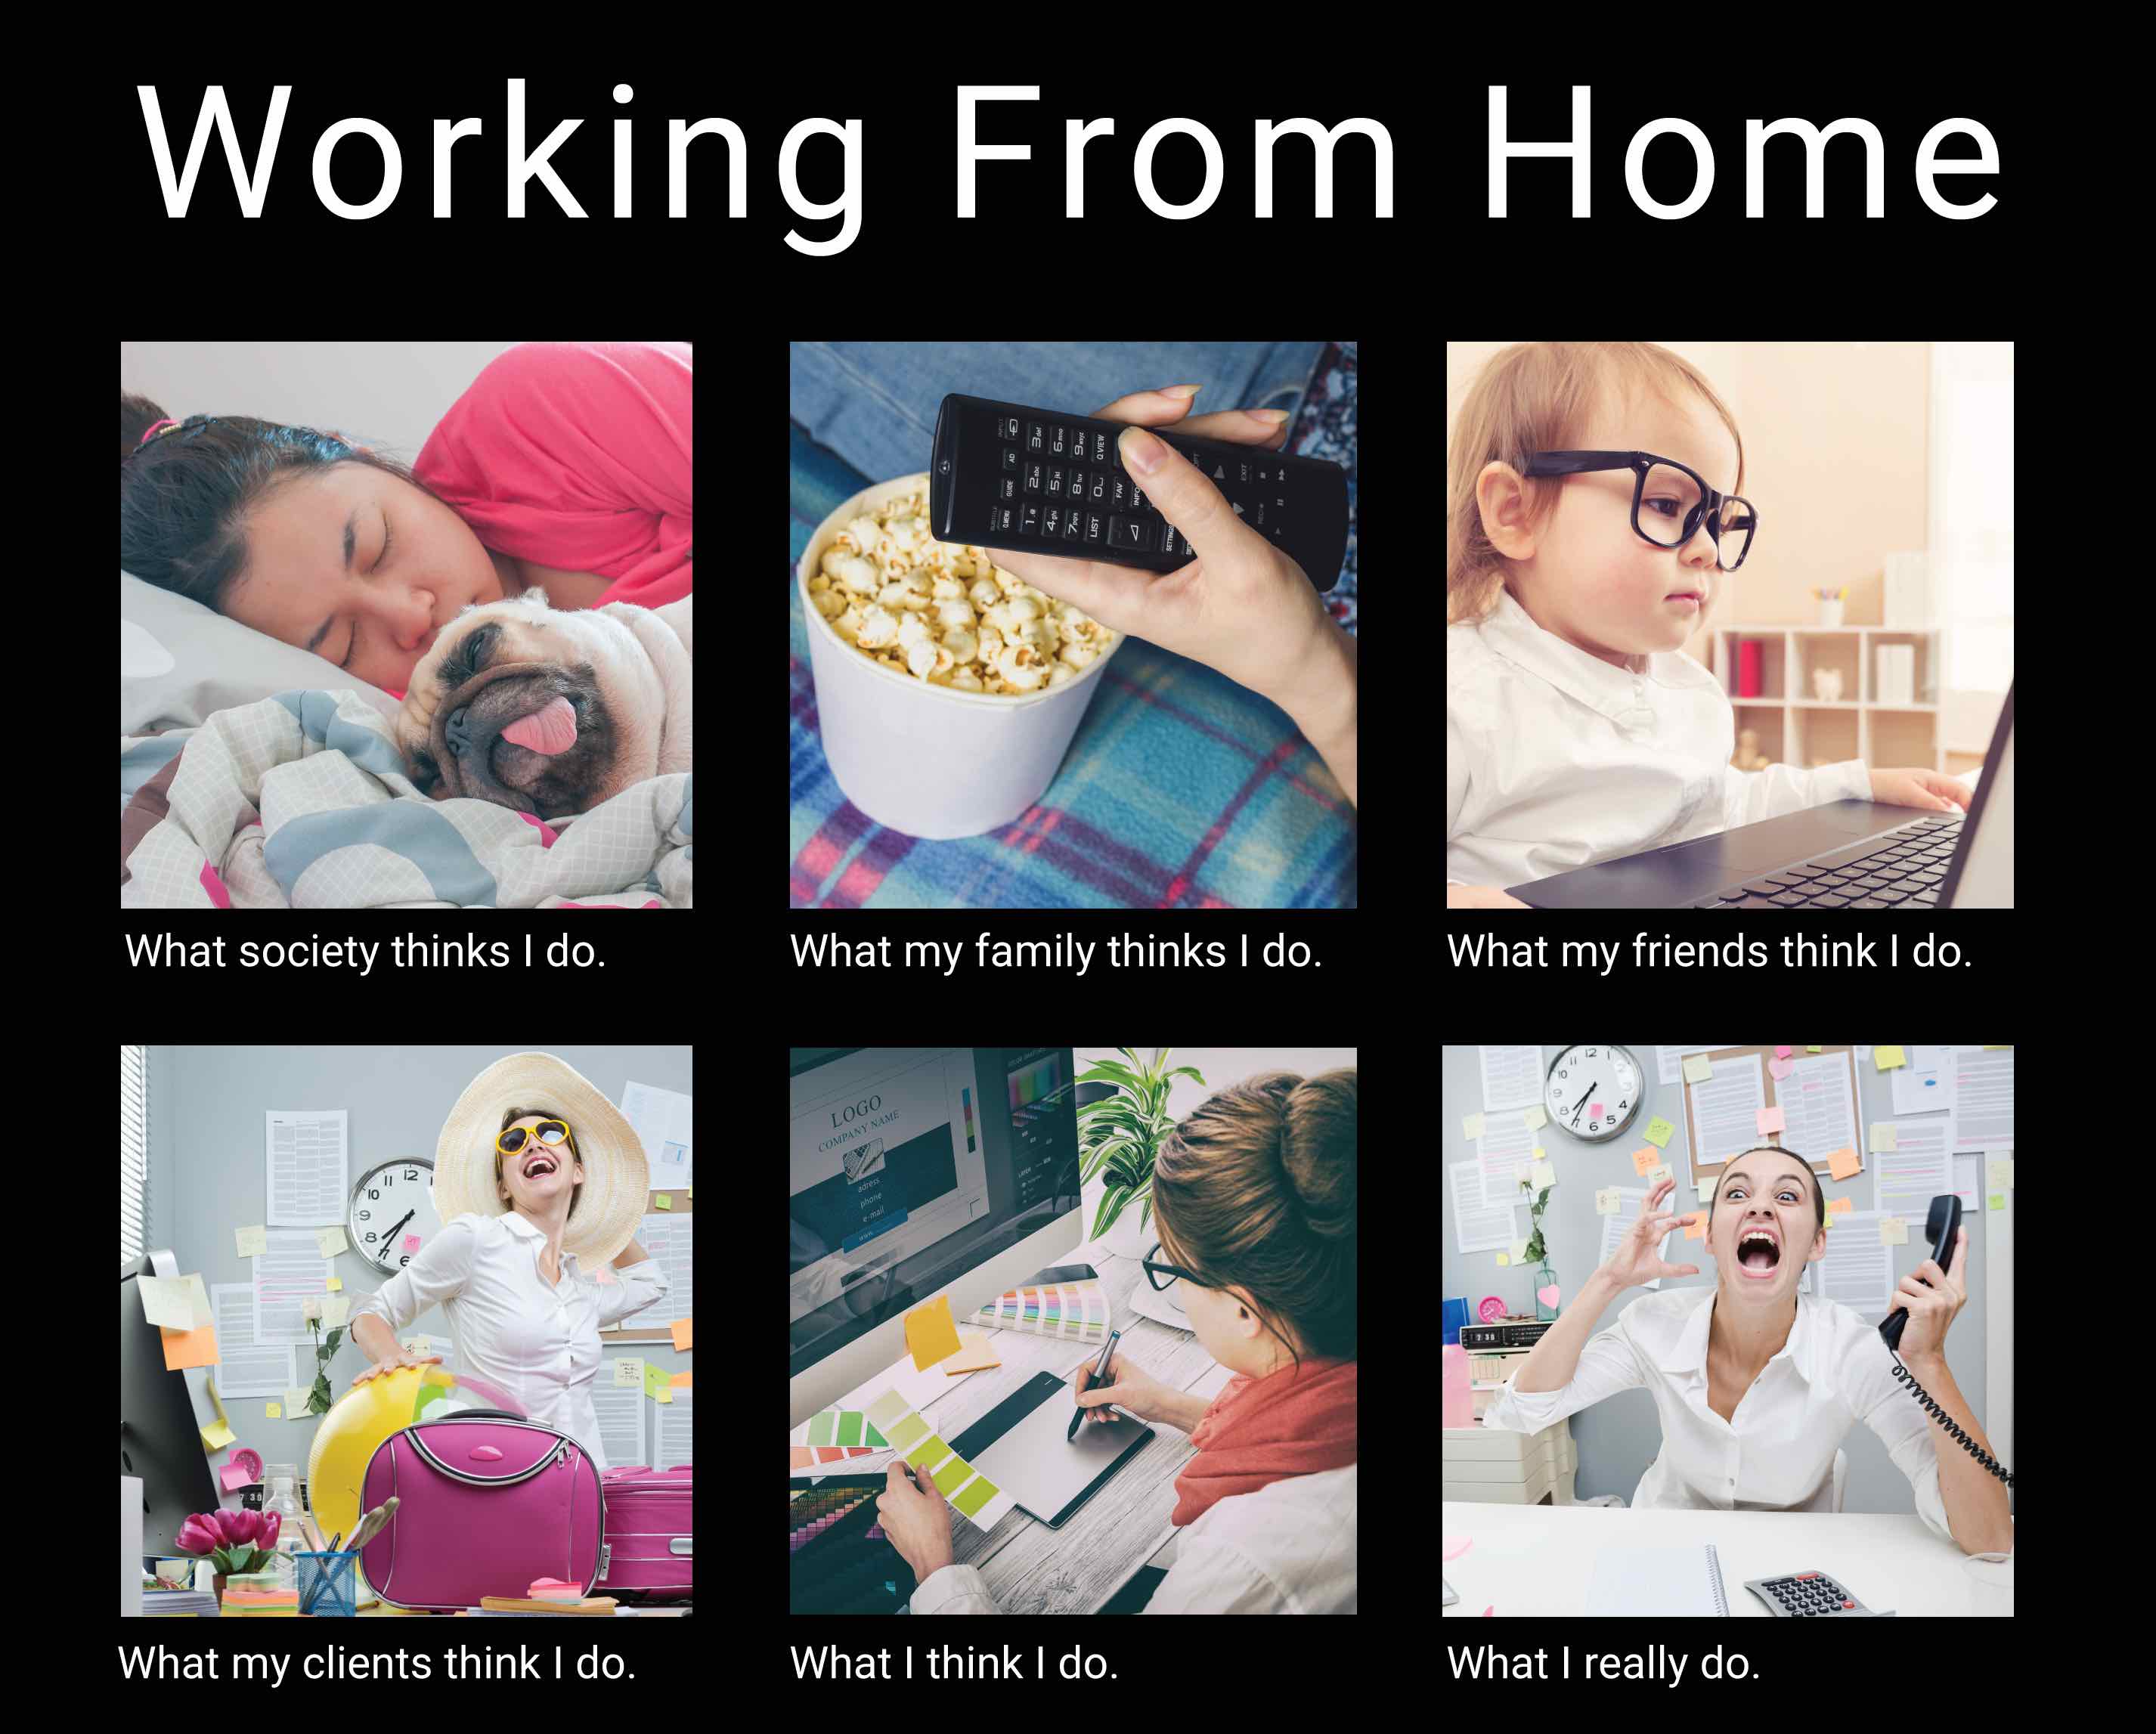 working from home meme funny - Working From Home Ad O Qview 3000 What society thinks I do. What my family thinks I do. What my friends think I do. 10 B 4 5 6 Logo Company Name 11 1 lo ddress phone 9 11 30 mire 30 What my clients think I do. What I think I